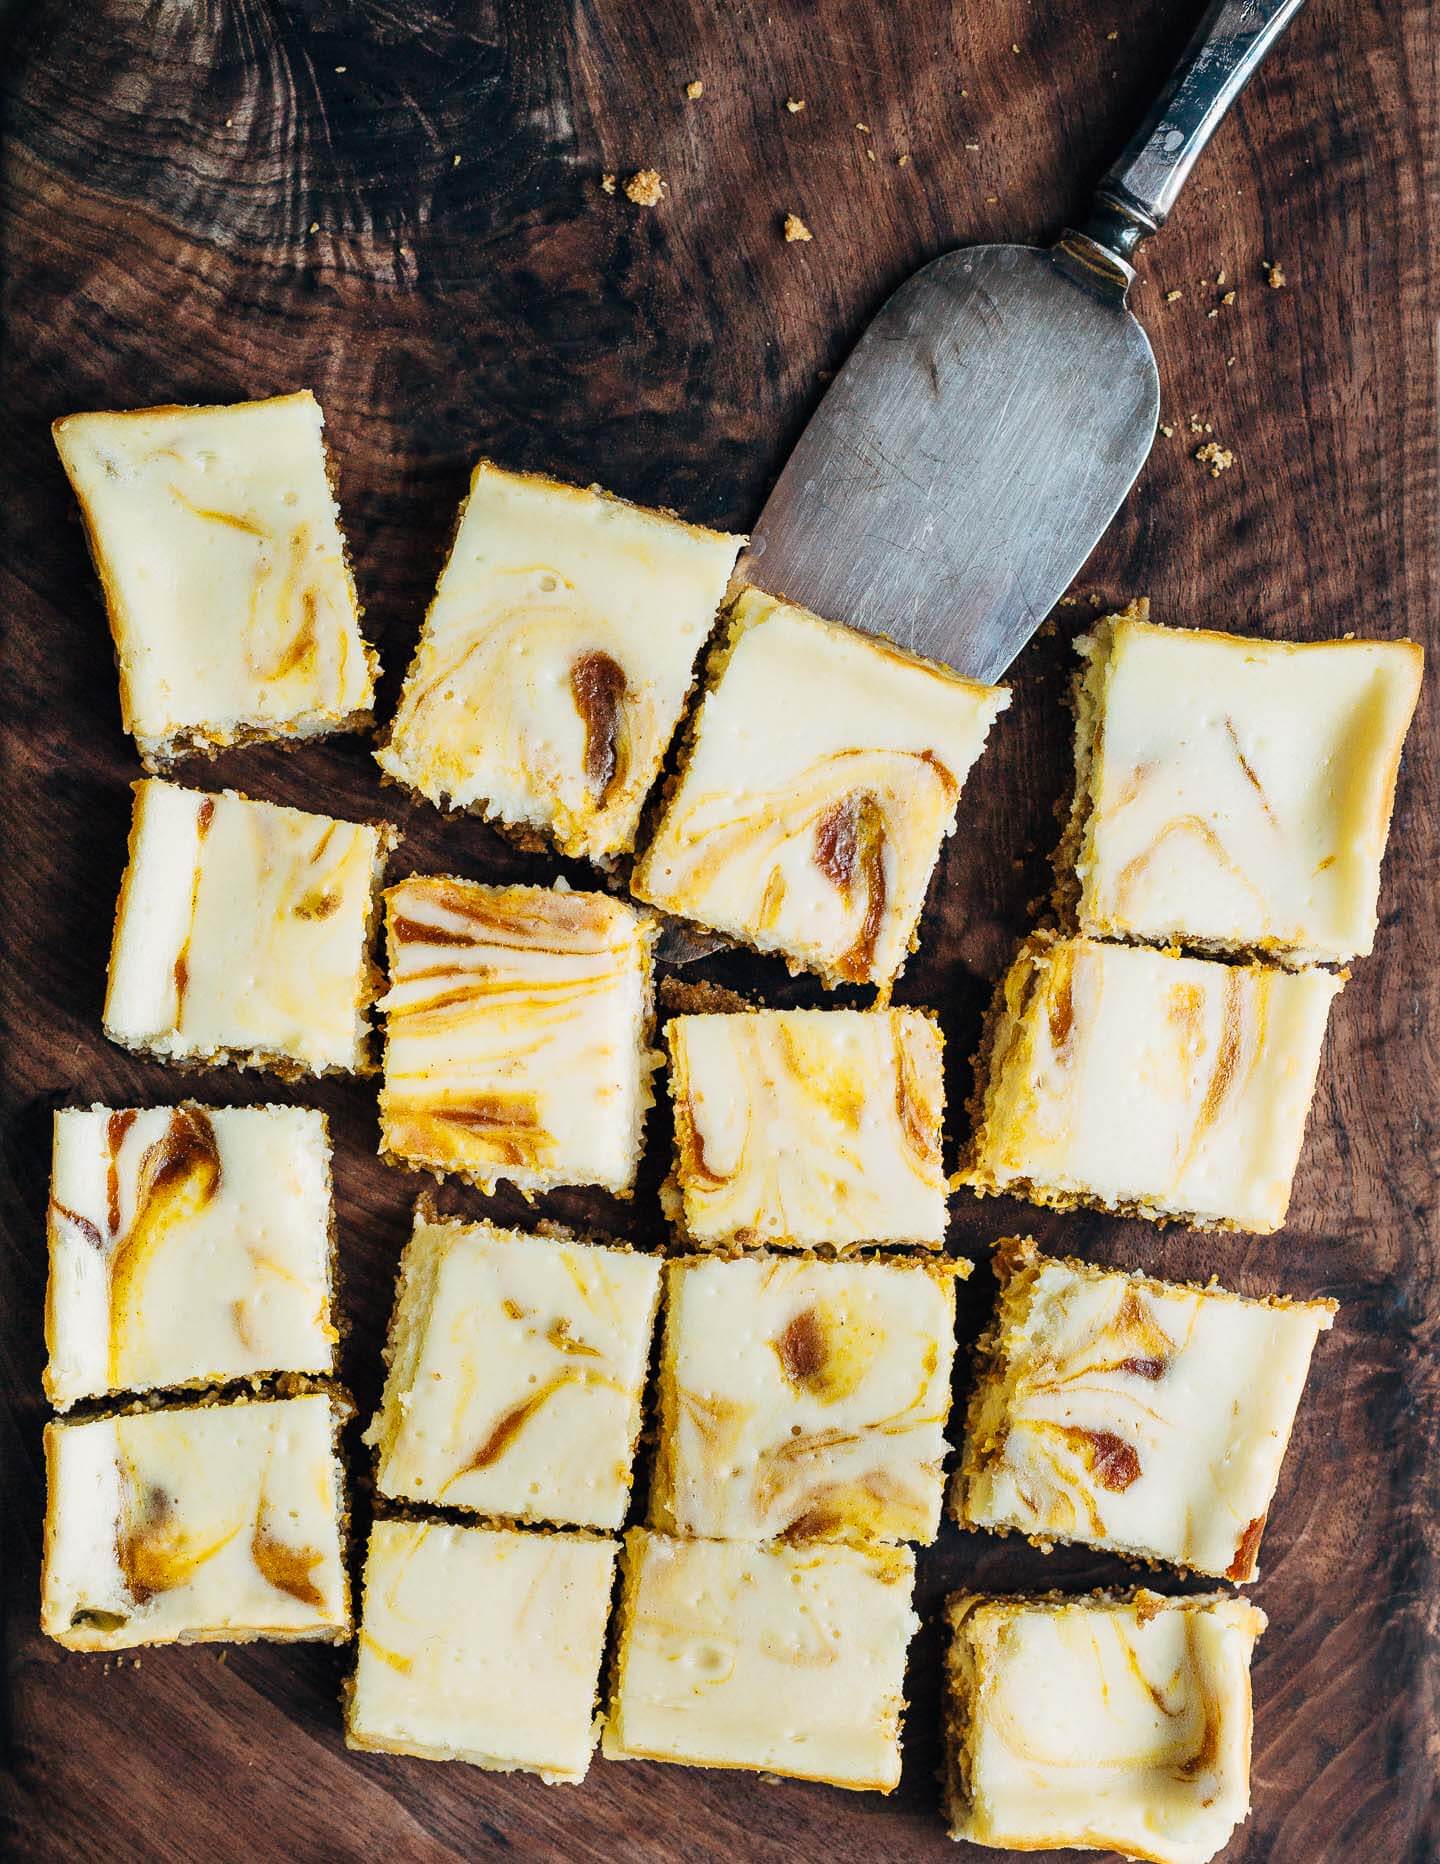 From Sarah Kieffer's new cookbook, 100 Cookies, these airy cream cheese pumpkin pie bars with a buttery graham cracker crust and spiced pumpkin pie swirls are the perfect fall treat!